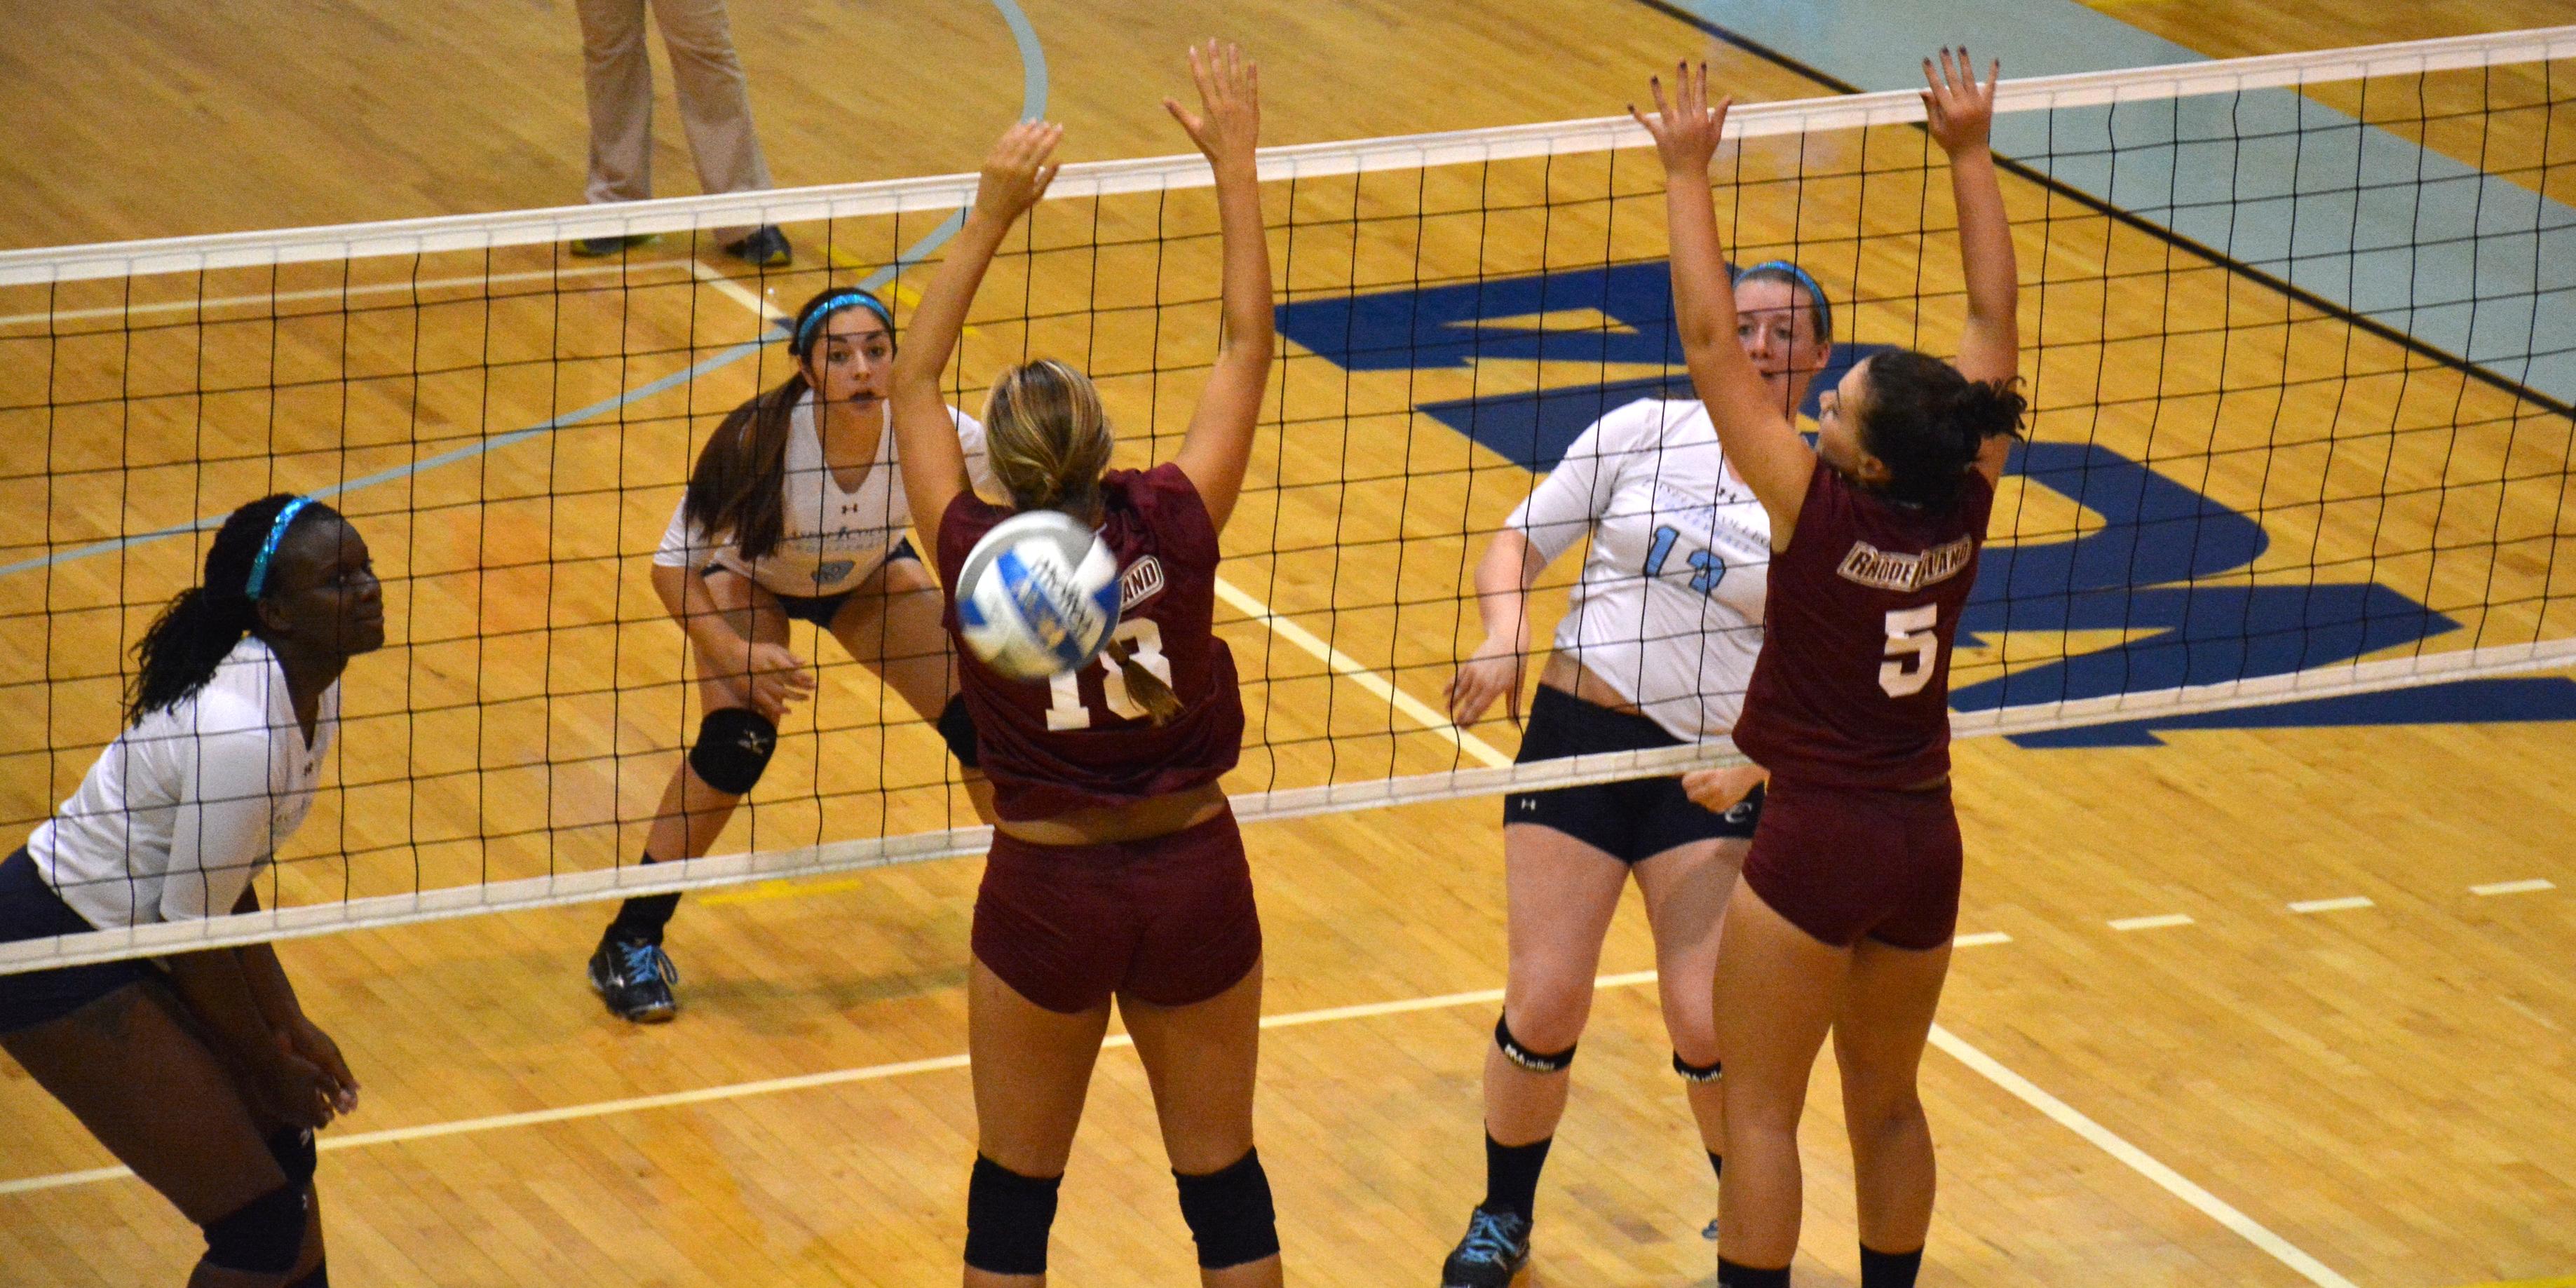 Simmons Sinks Lasell, 3-1 in Women's Volleyball